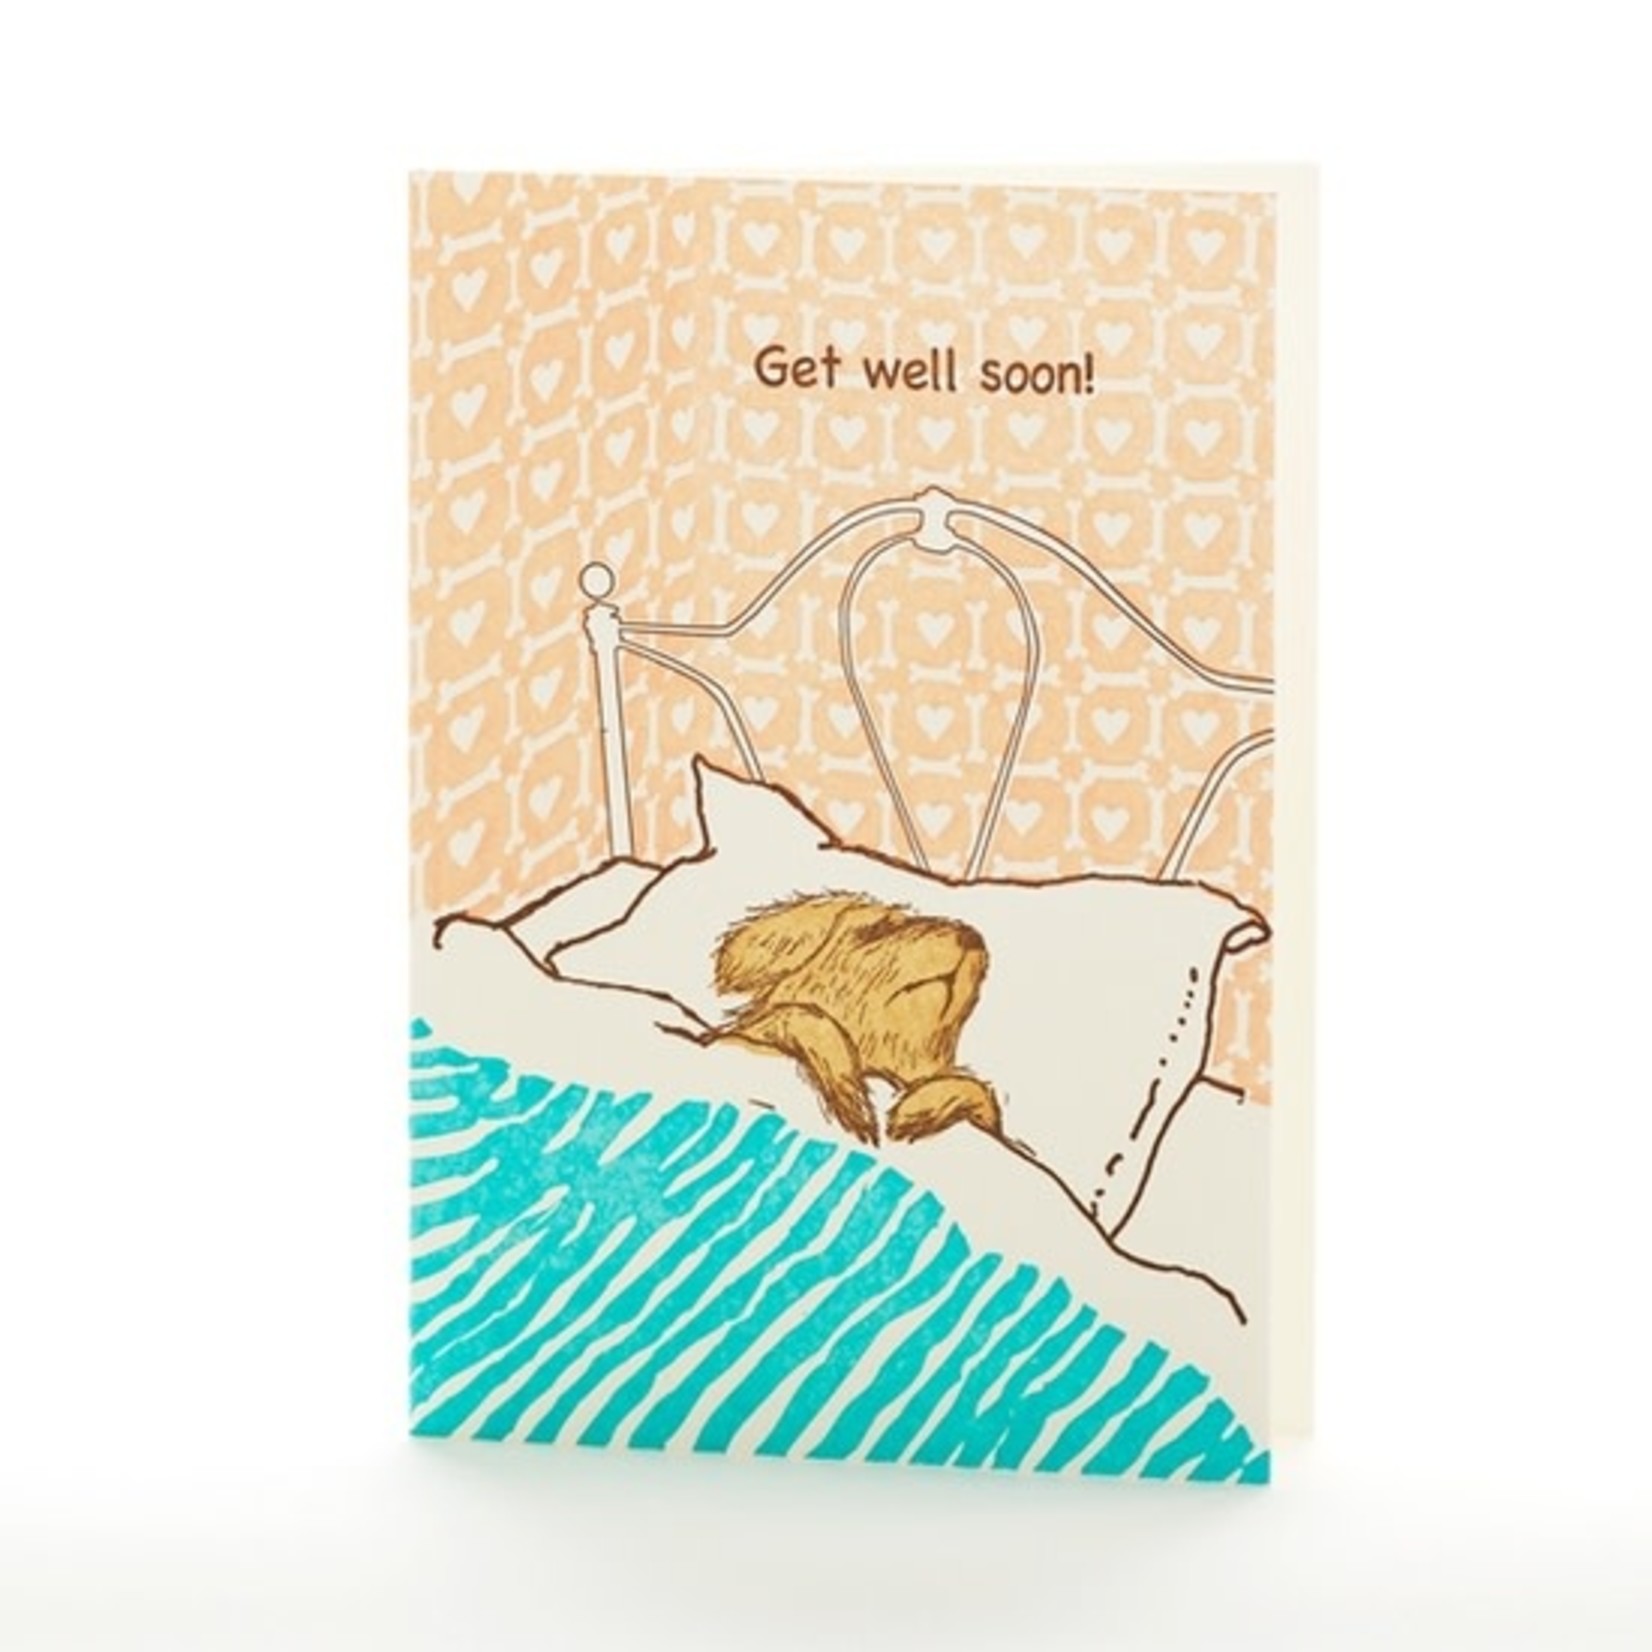 Greeting Cards - Feel Better Sick Dog Get Well